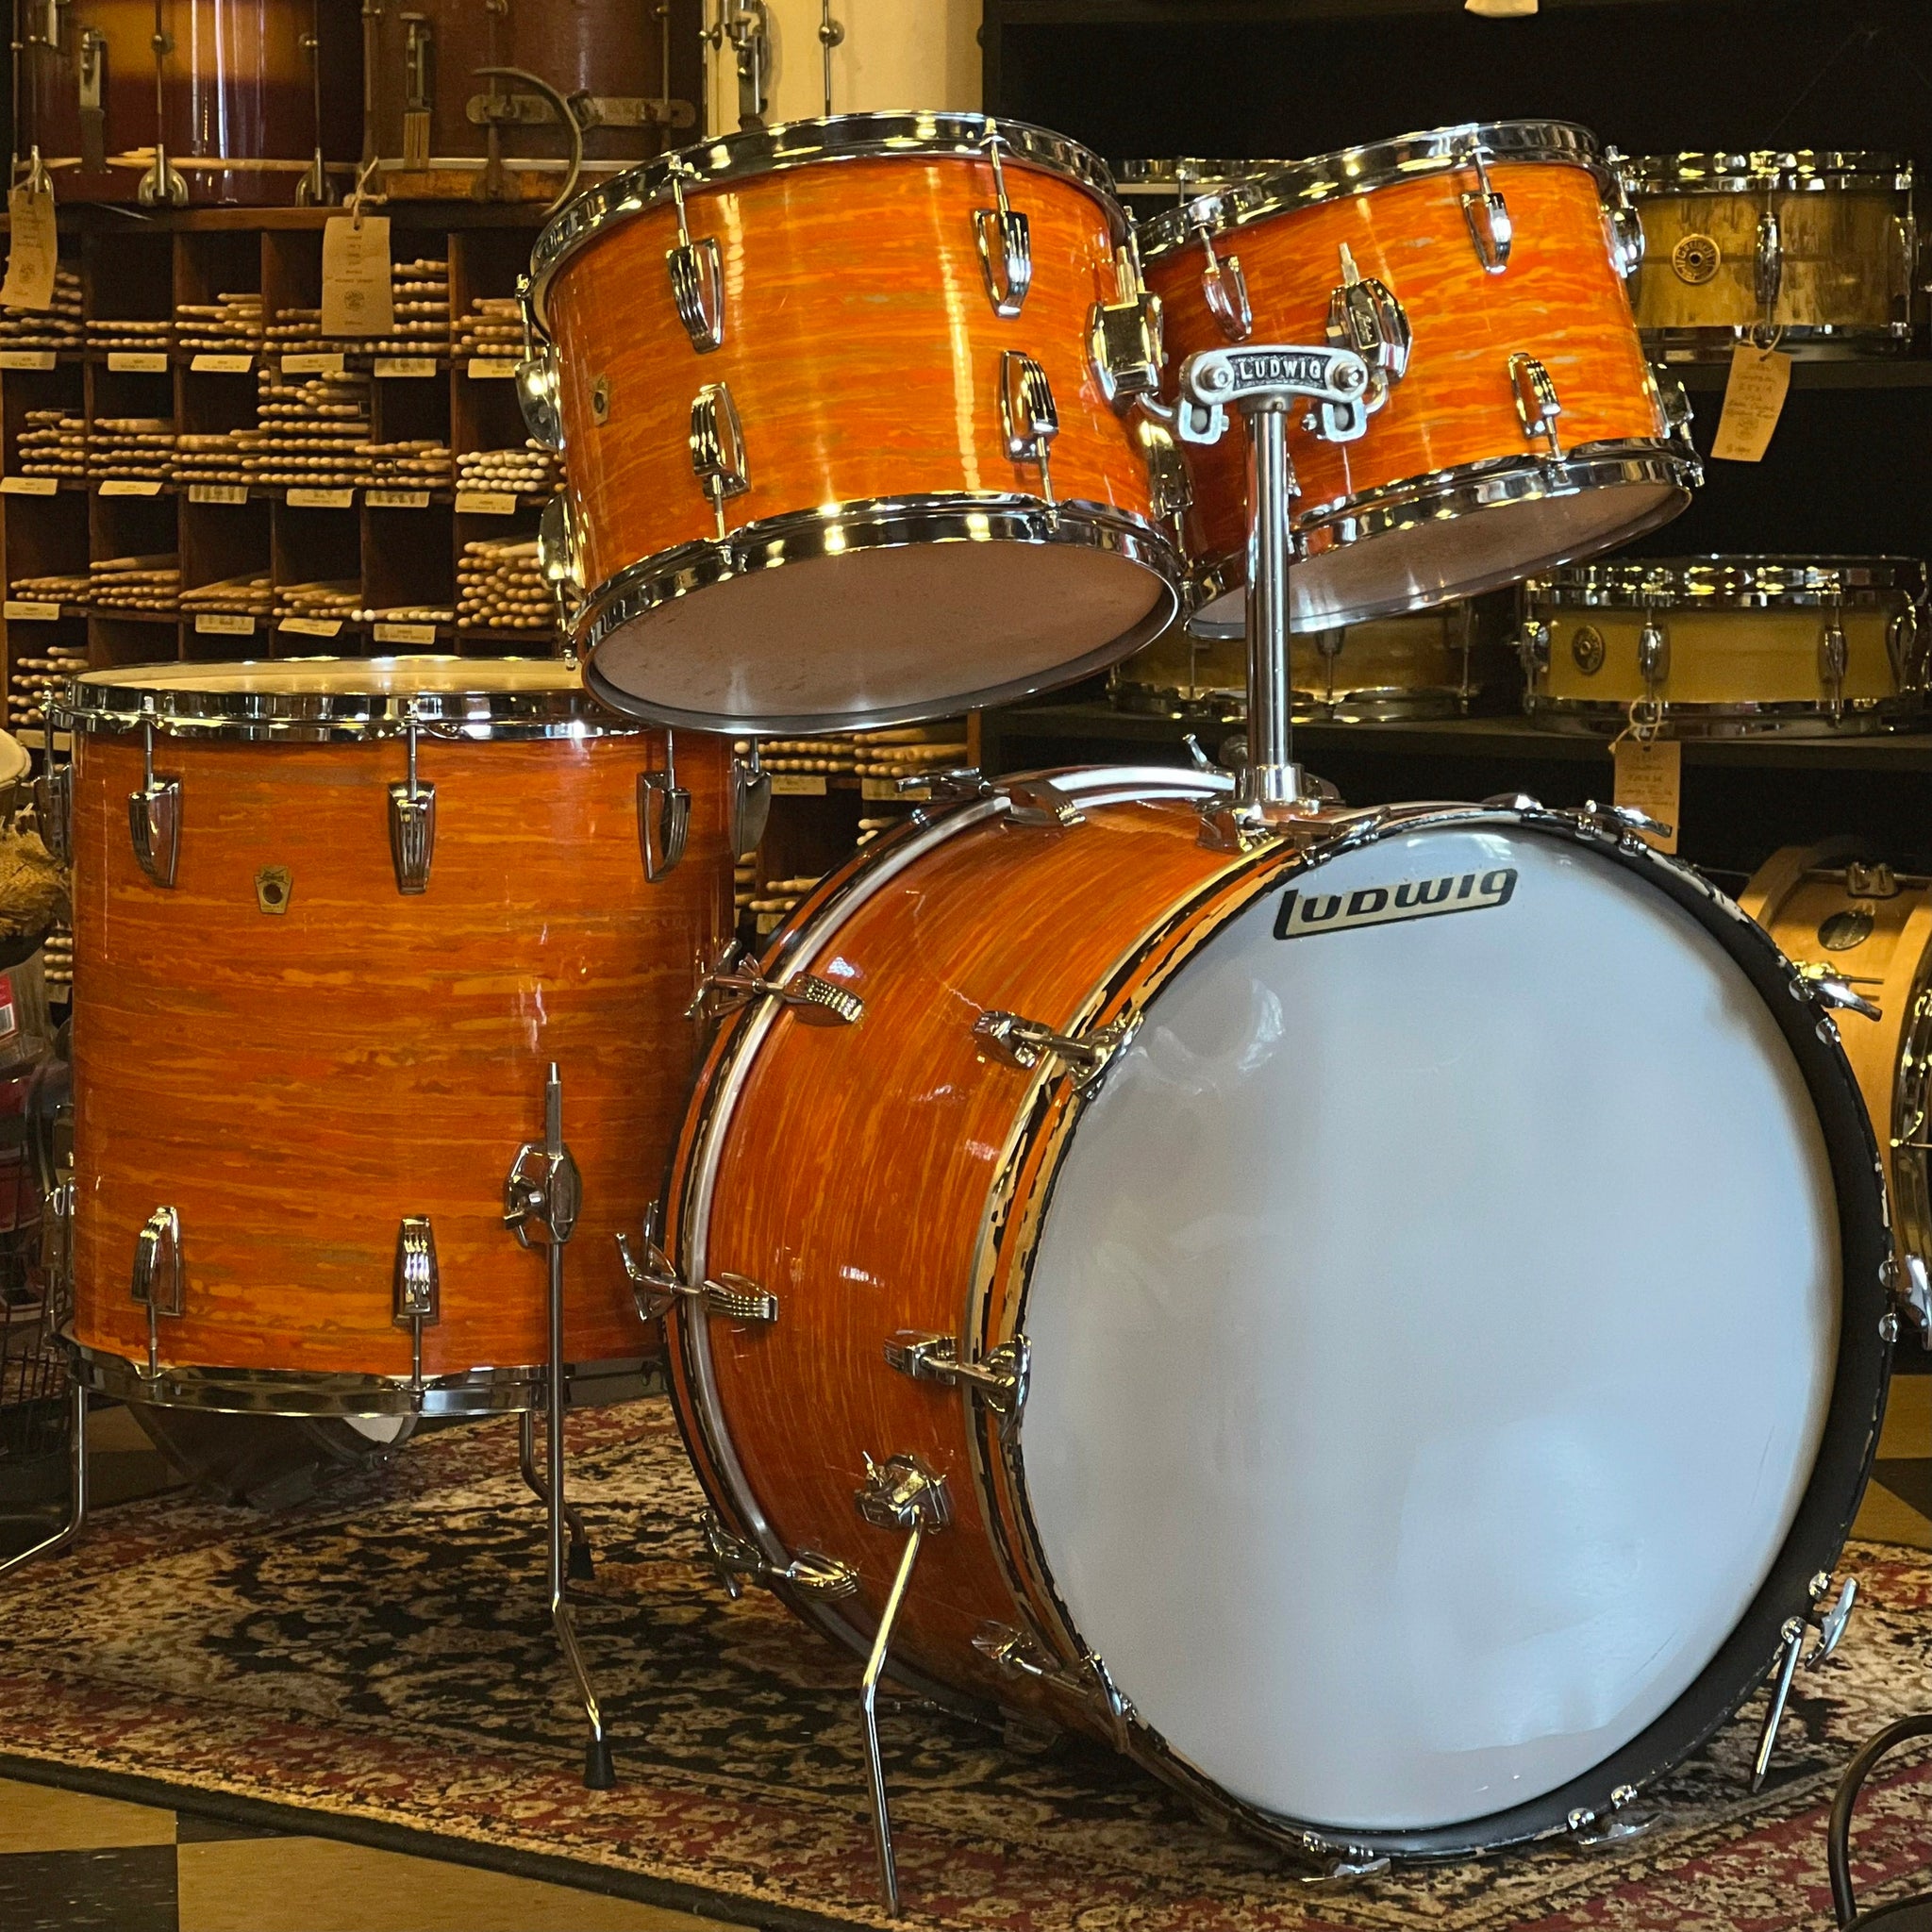 VINTAGE 1968 Ludwig Hollywood Outfit in Mod Orange - 14x22, 8x12